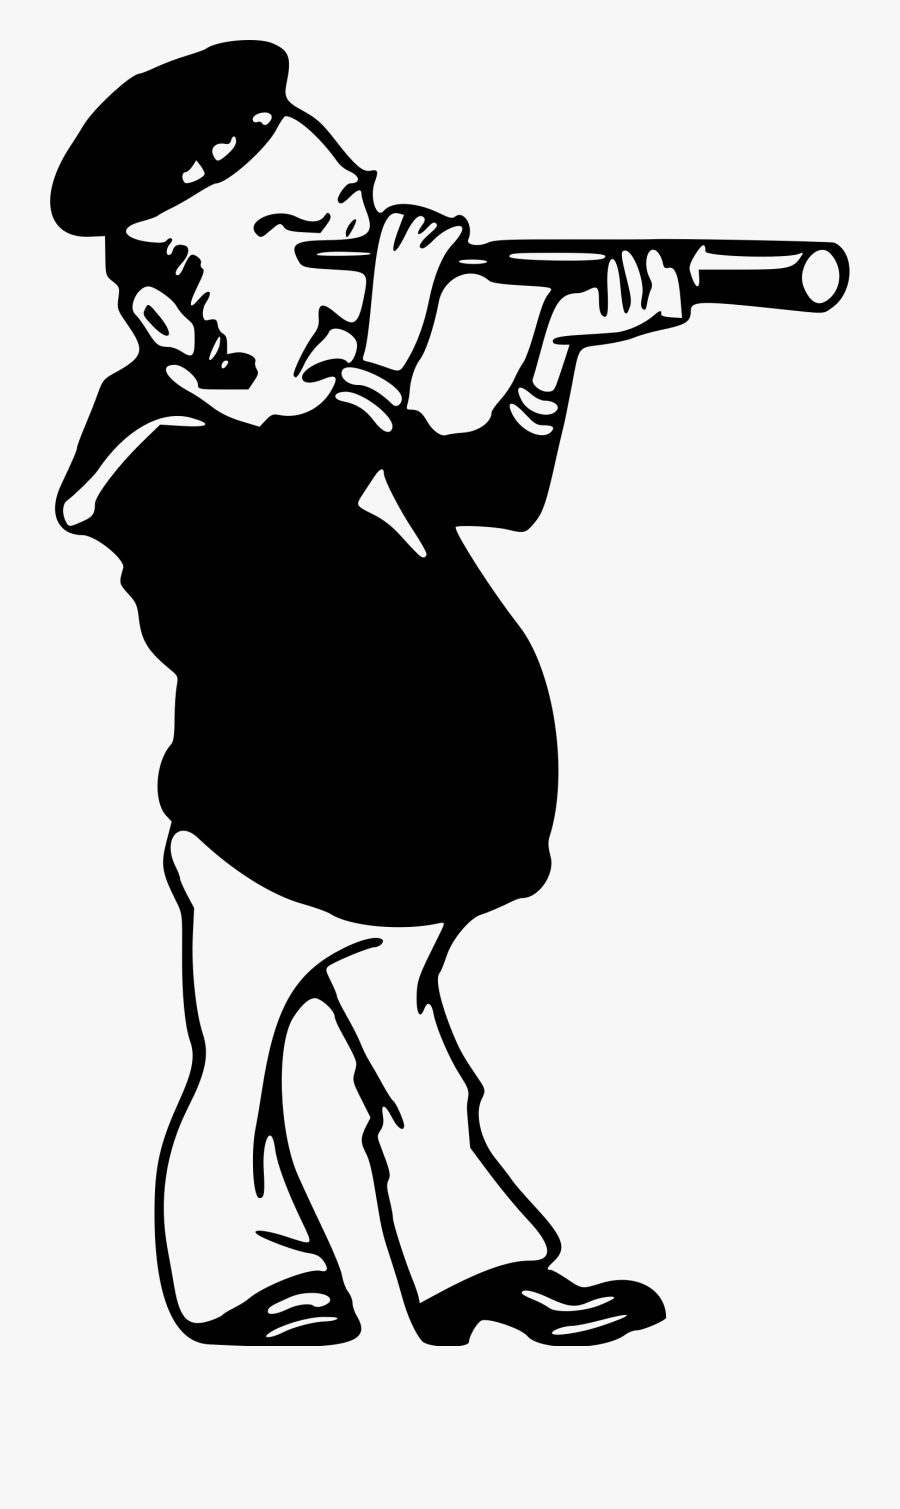 And Big Image Png - Sailor With A Telescope Png, Transparent Clipart